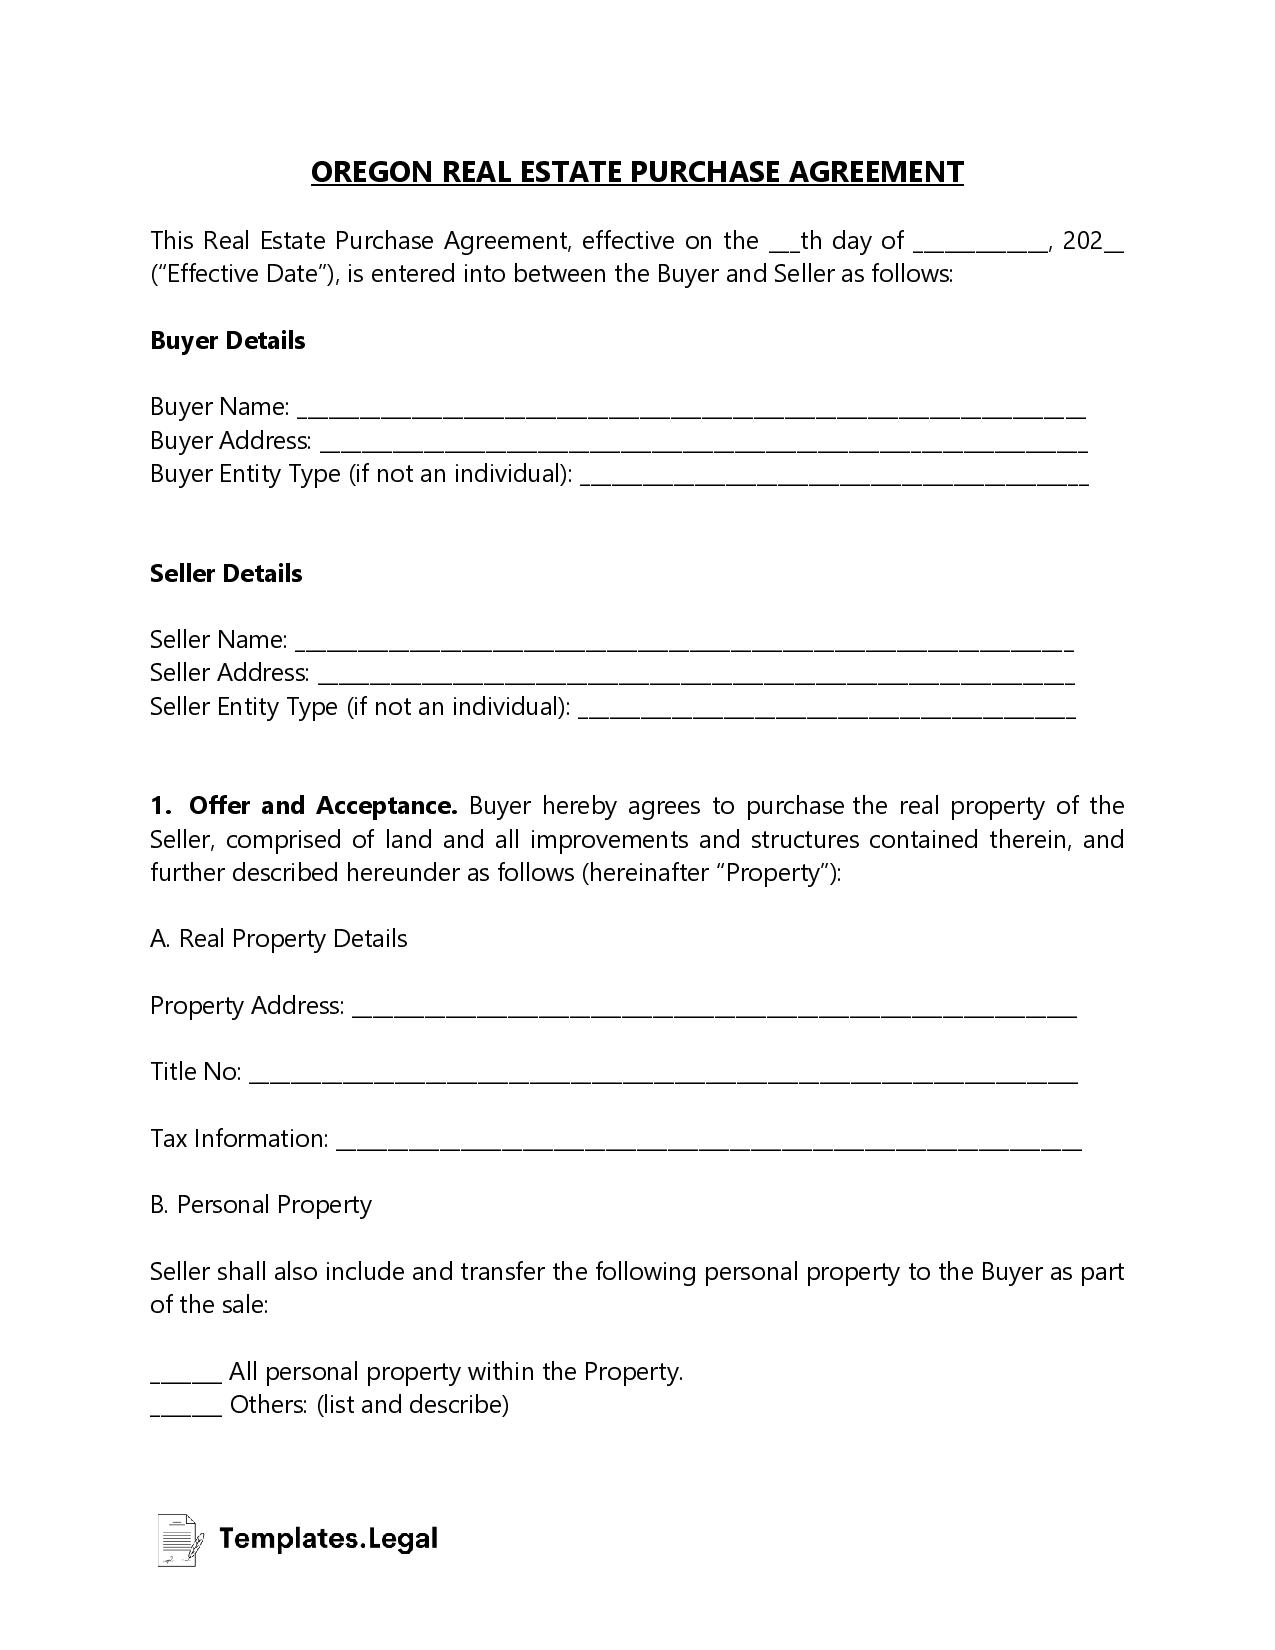 Oregon Real Estate Purchase Agreement - Templates.Legal